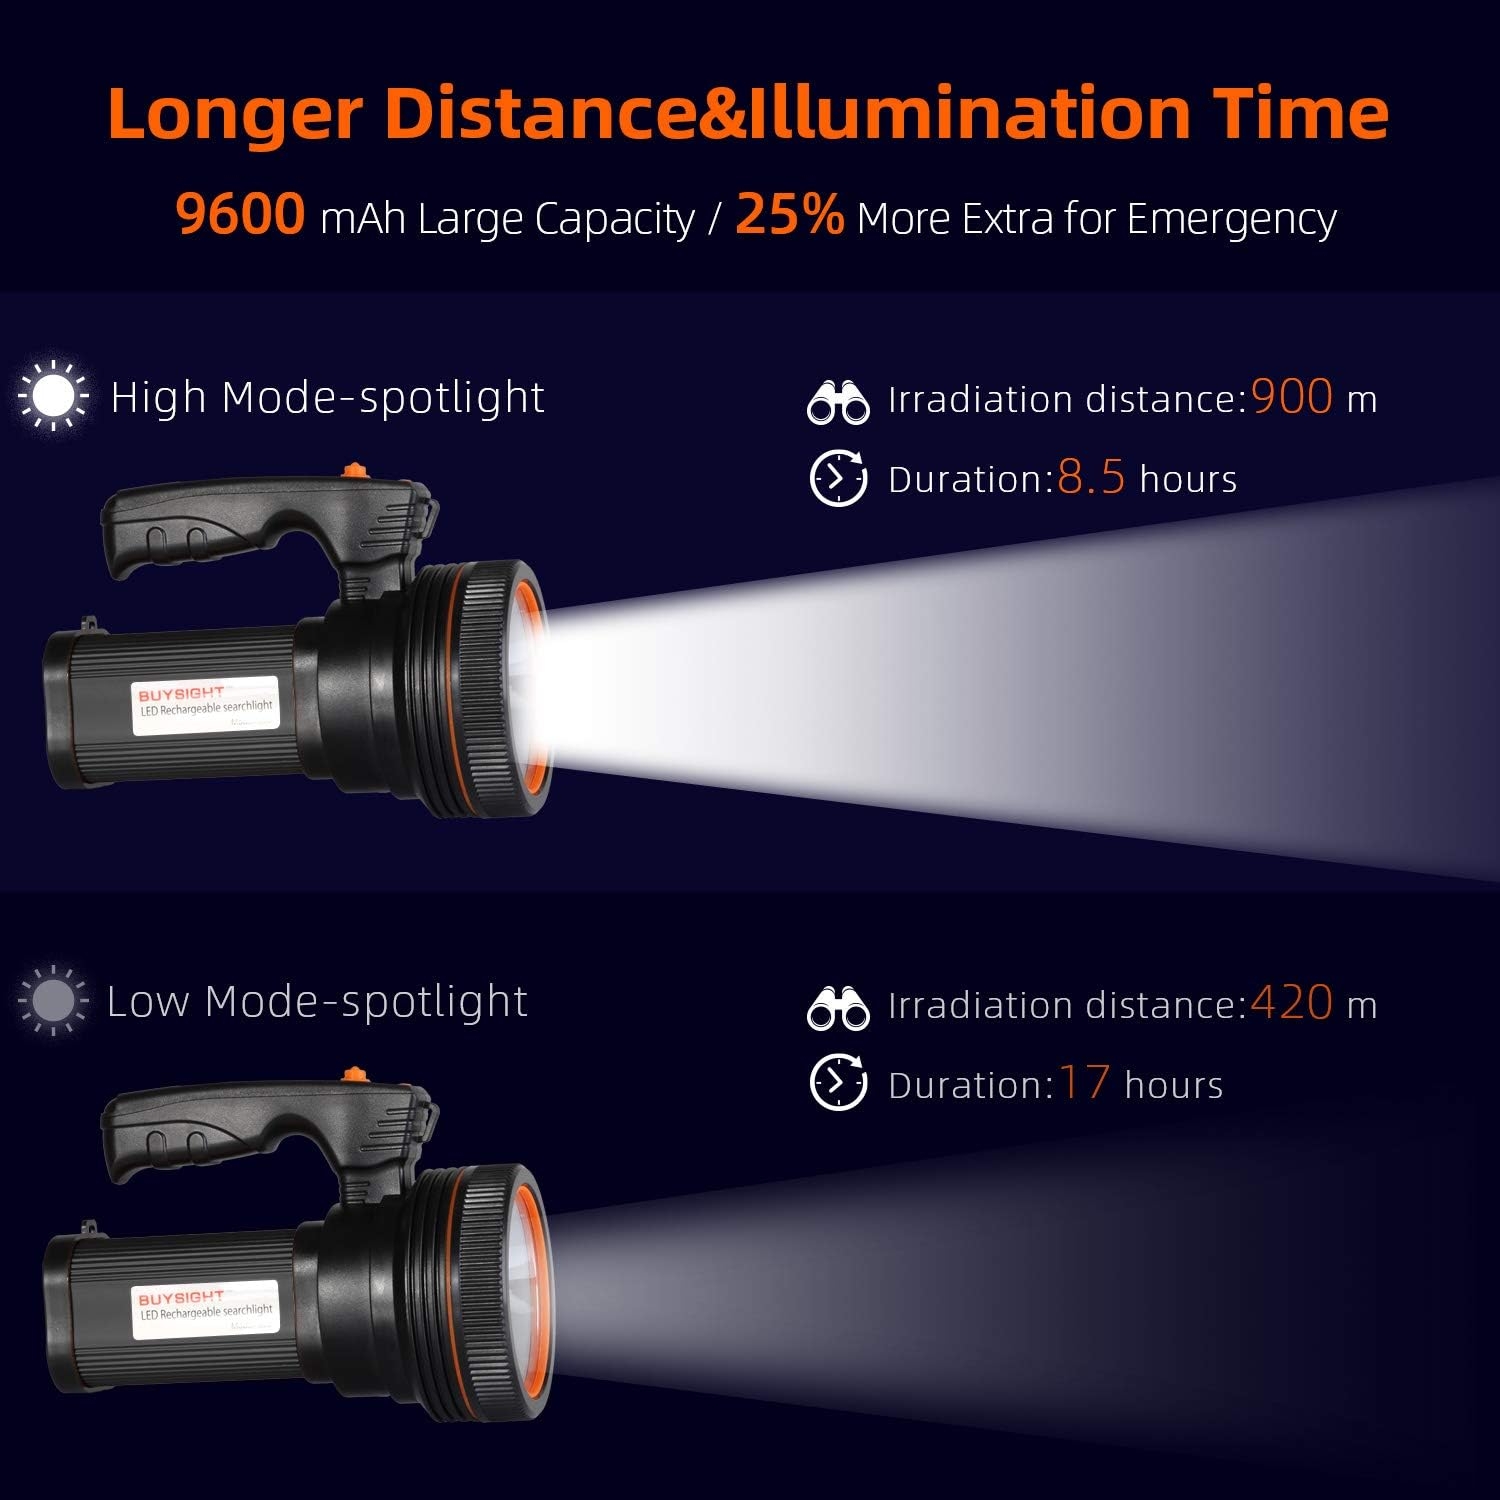 BUYSIGHT Bright Rechargeable Searchlight handheld LED Flashlight Tactical Flashlight with Handle CREE L2 Spotlight 6000 Lumens Ultra-long Standby Electric Torch with USB OUTPUT as a Power Bank (Black)